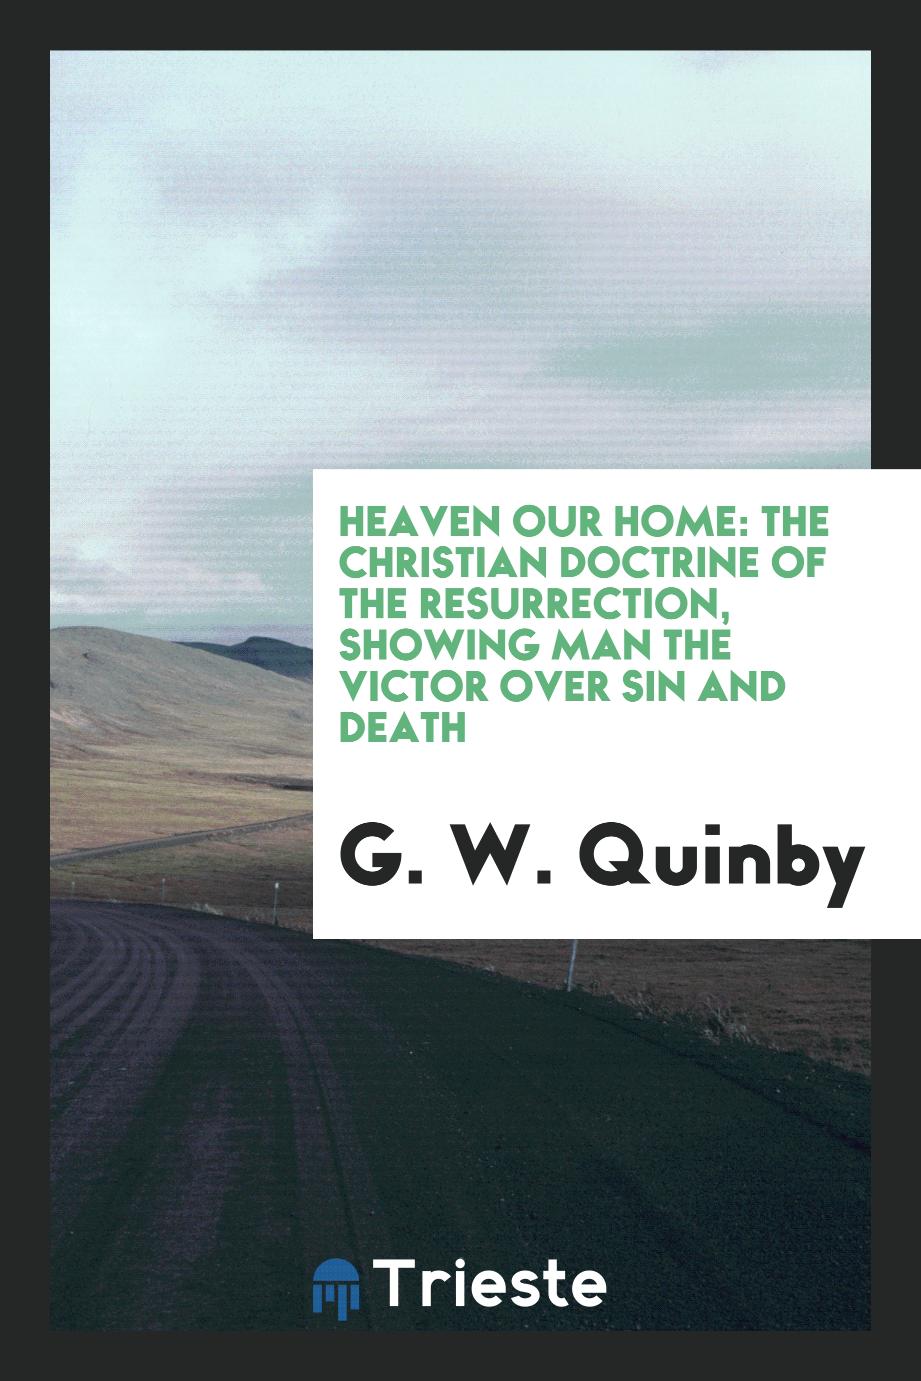 Heaven our home: the Christian doctrine of the resurrection, showing man the victor over sin and death